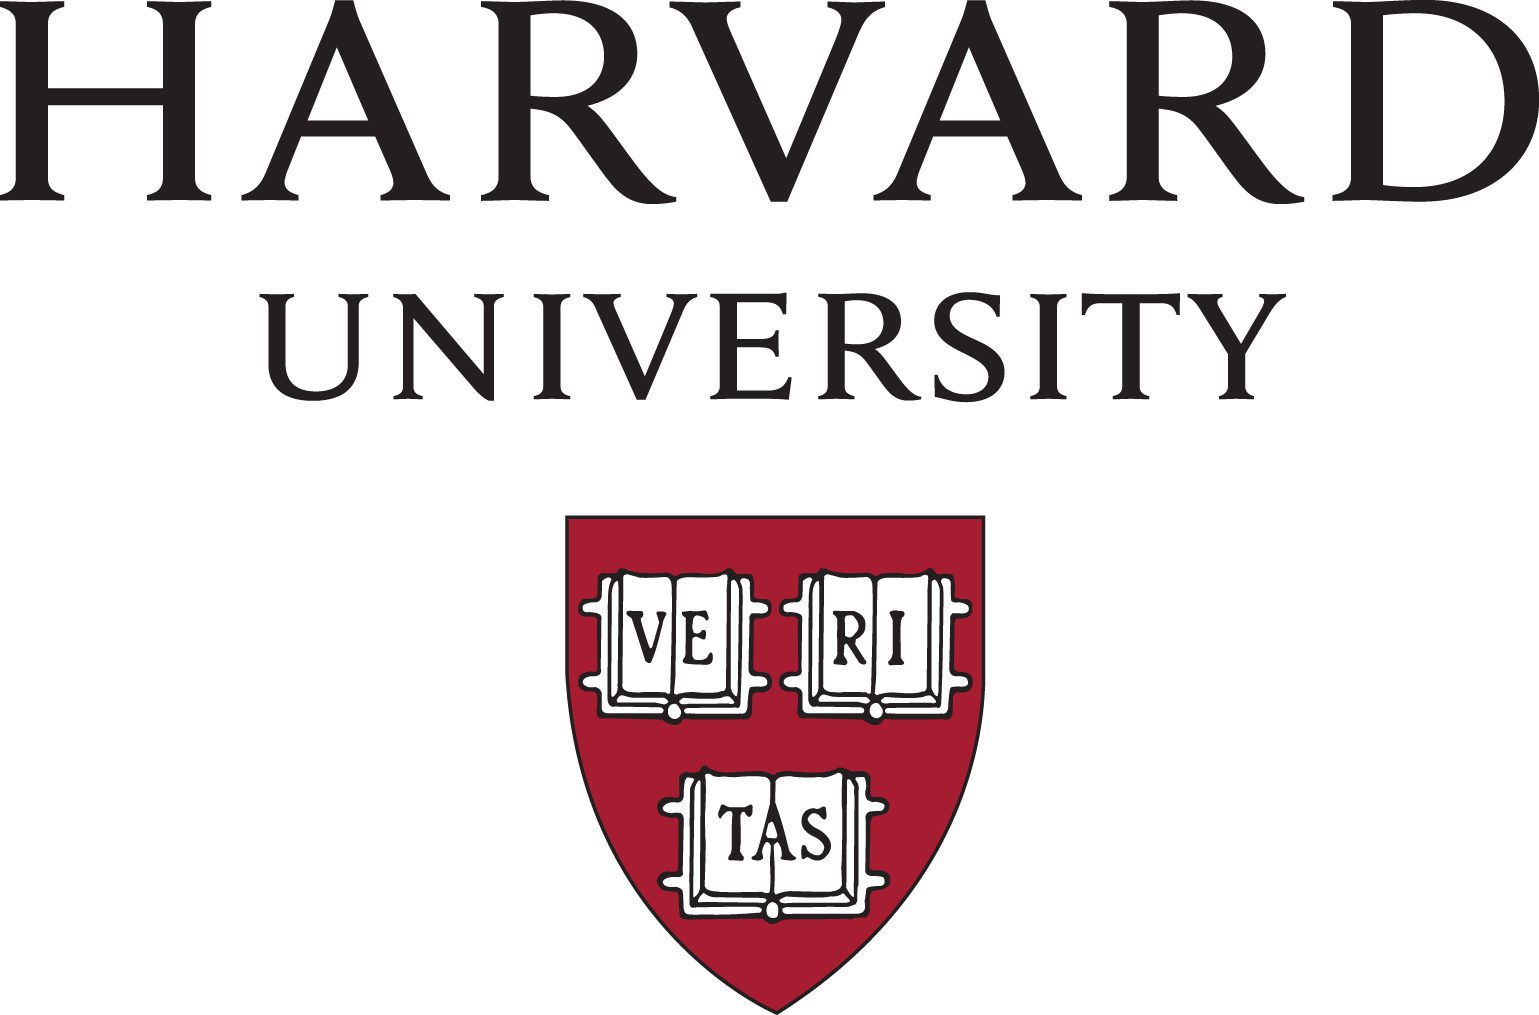 A logo of harvard university and the seal of the school.